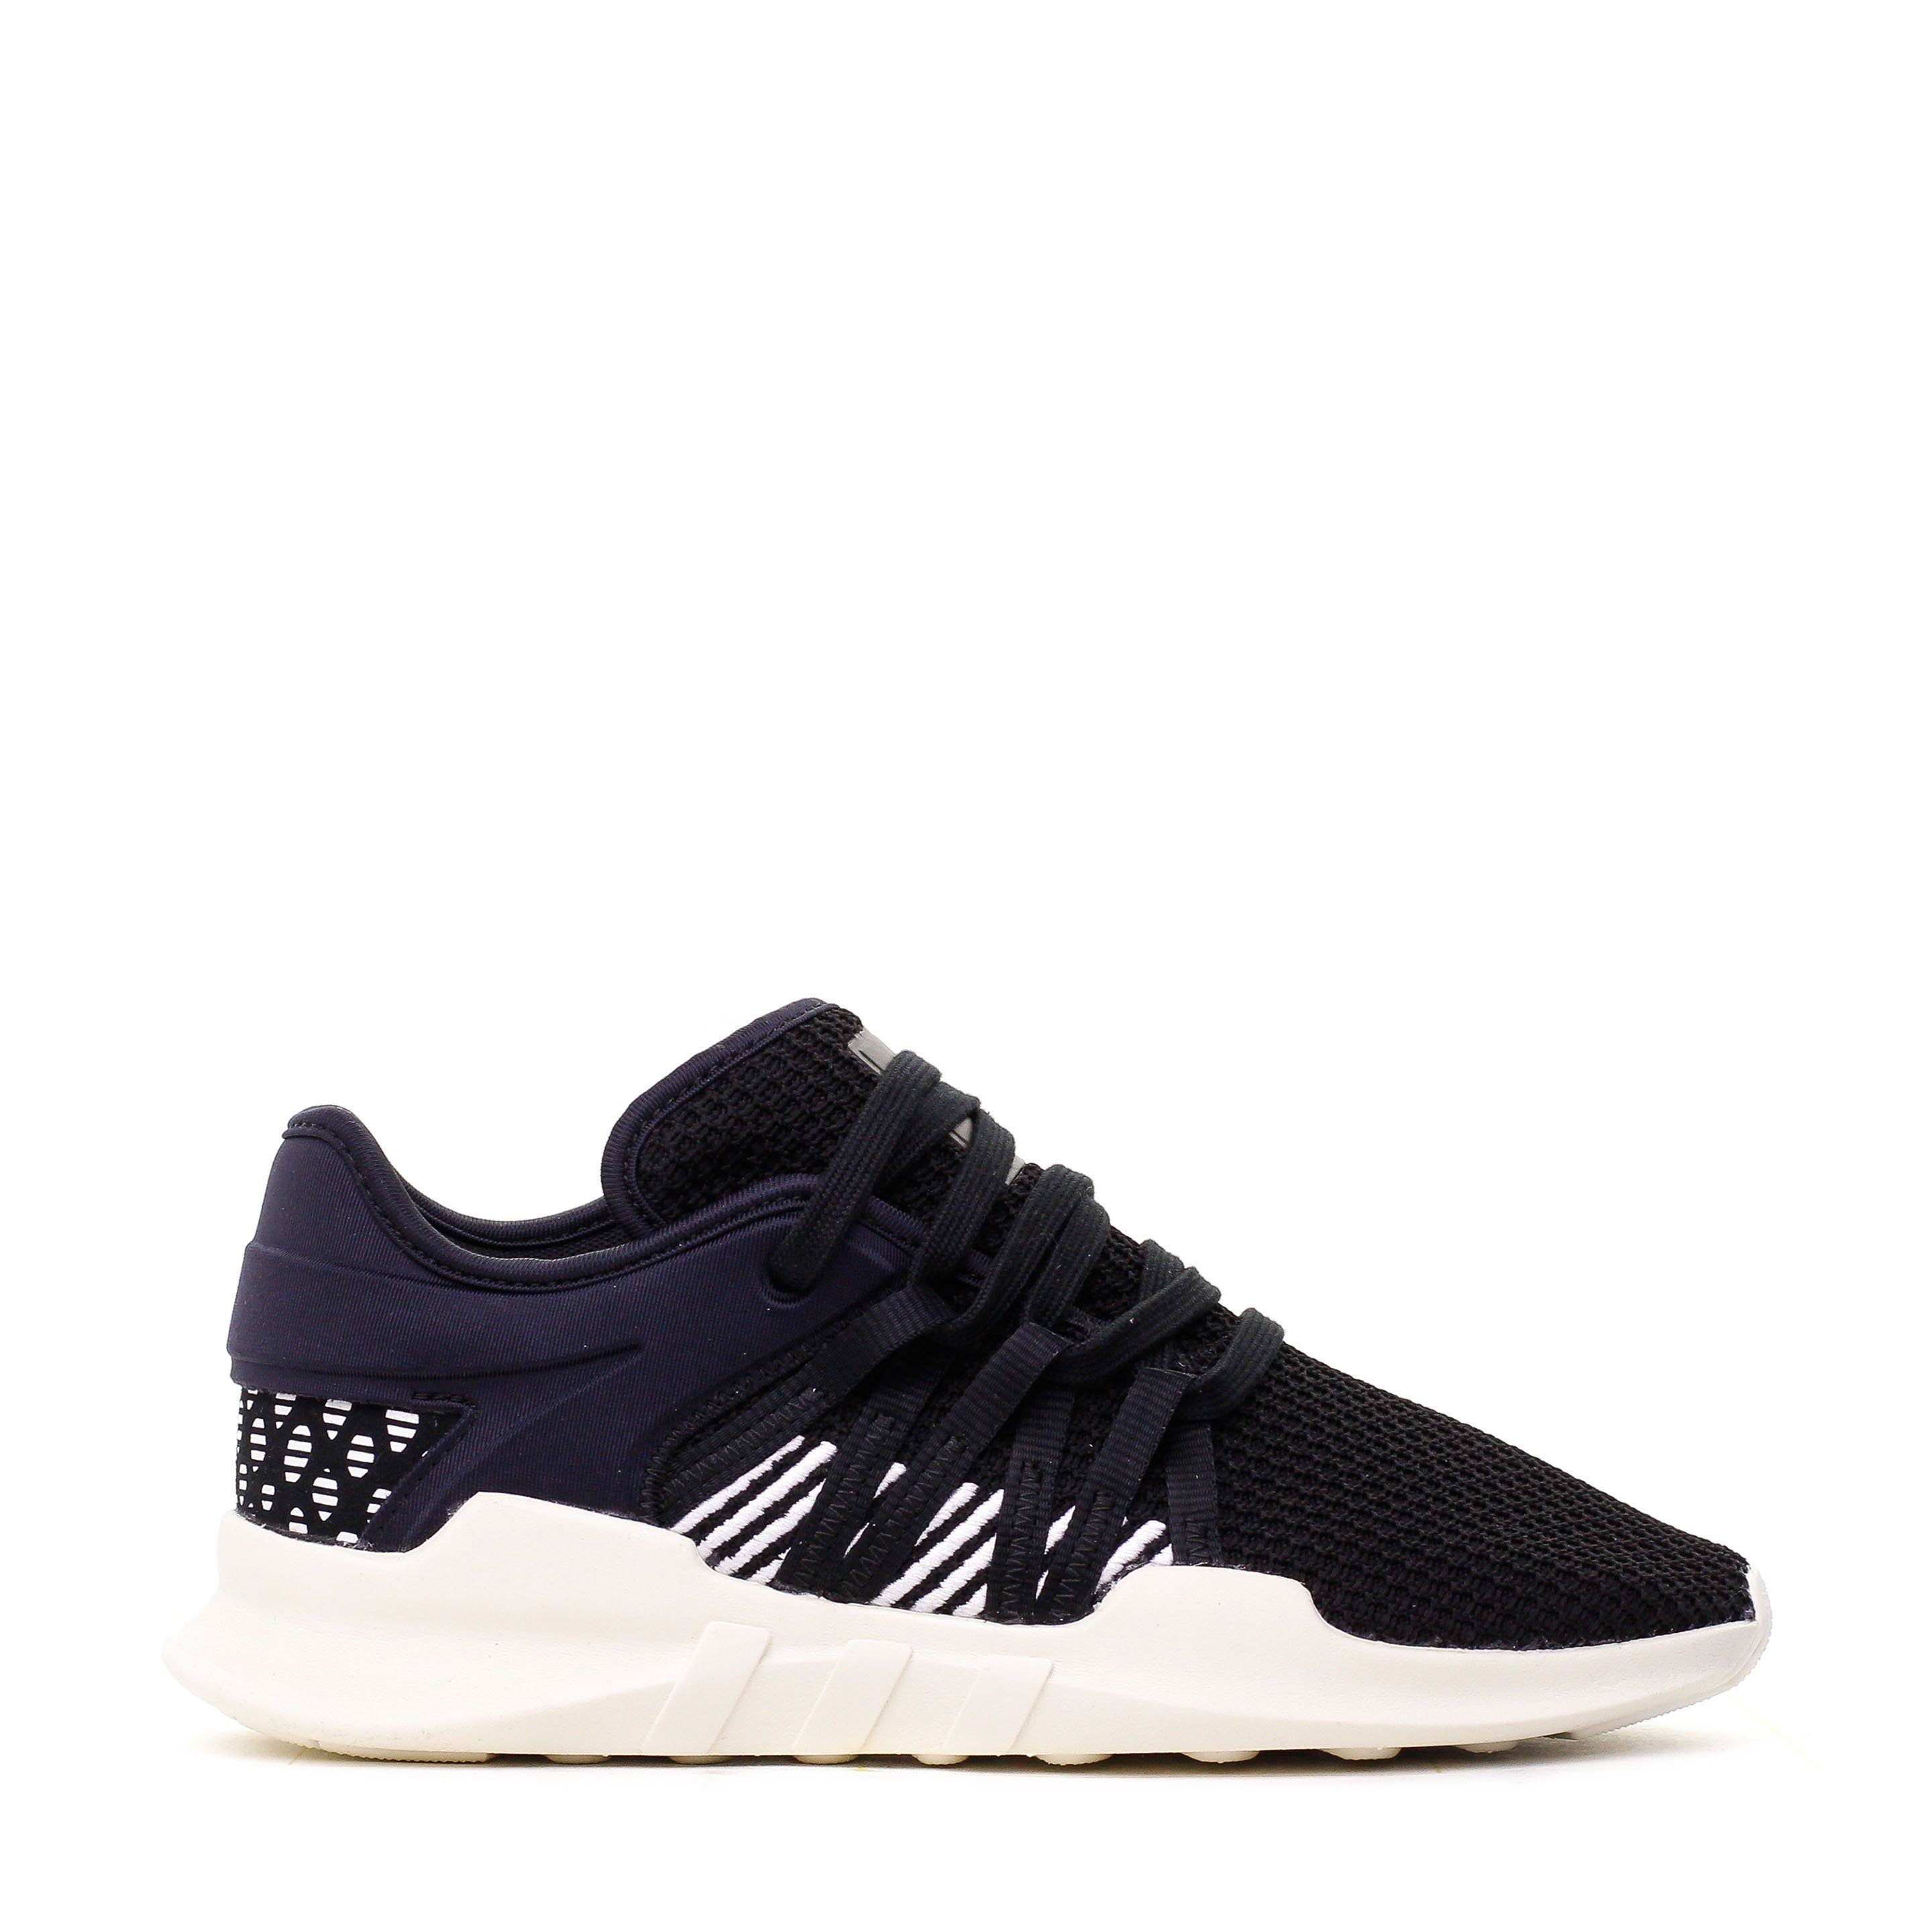 Originals Women EQT Racing Adv W Black BY9798 (Fast shipping) - adidas campus laces shoes black - HotelomegaShops